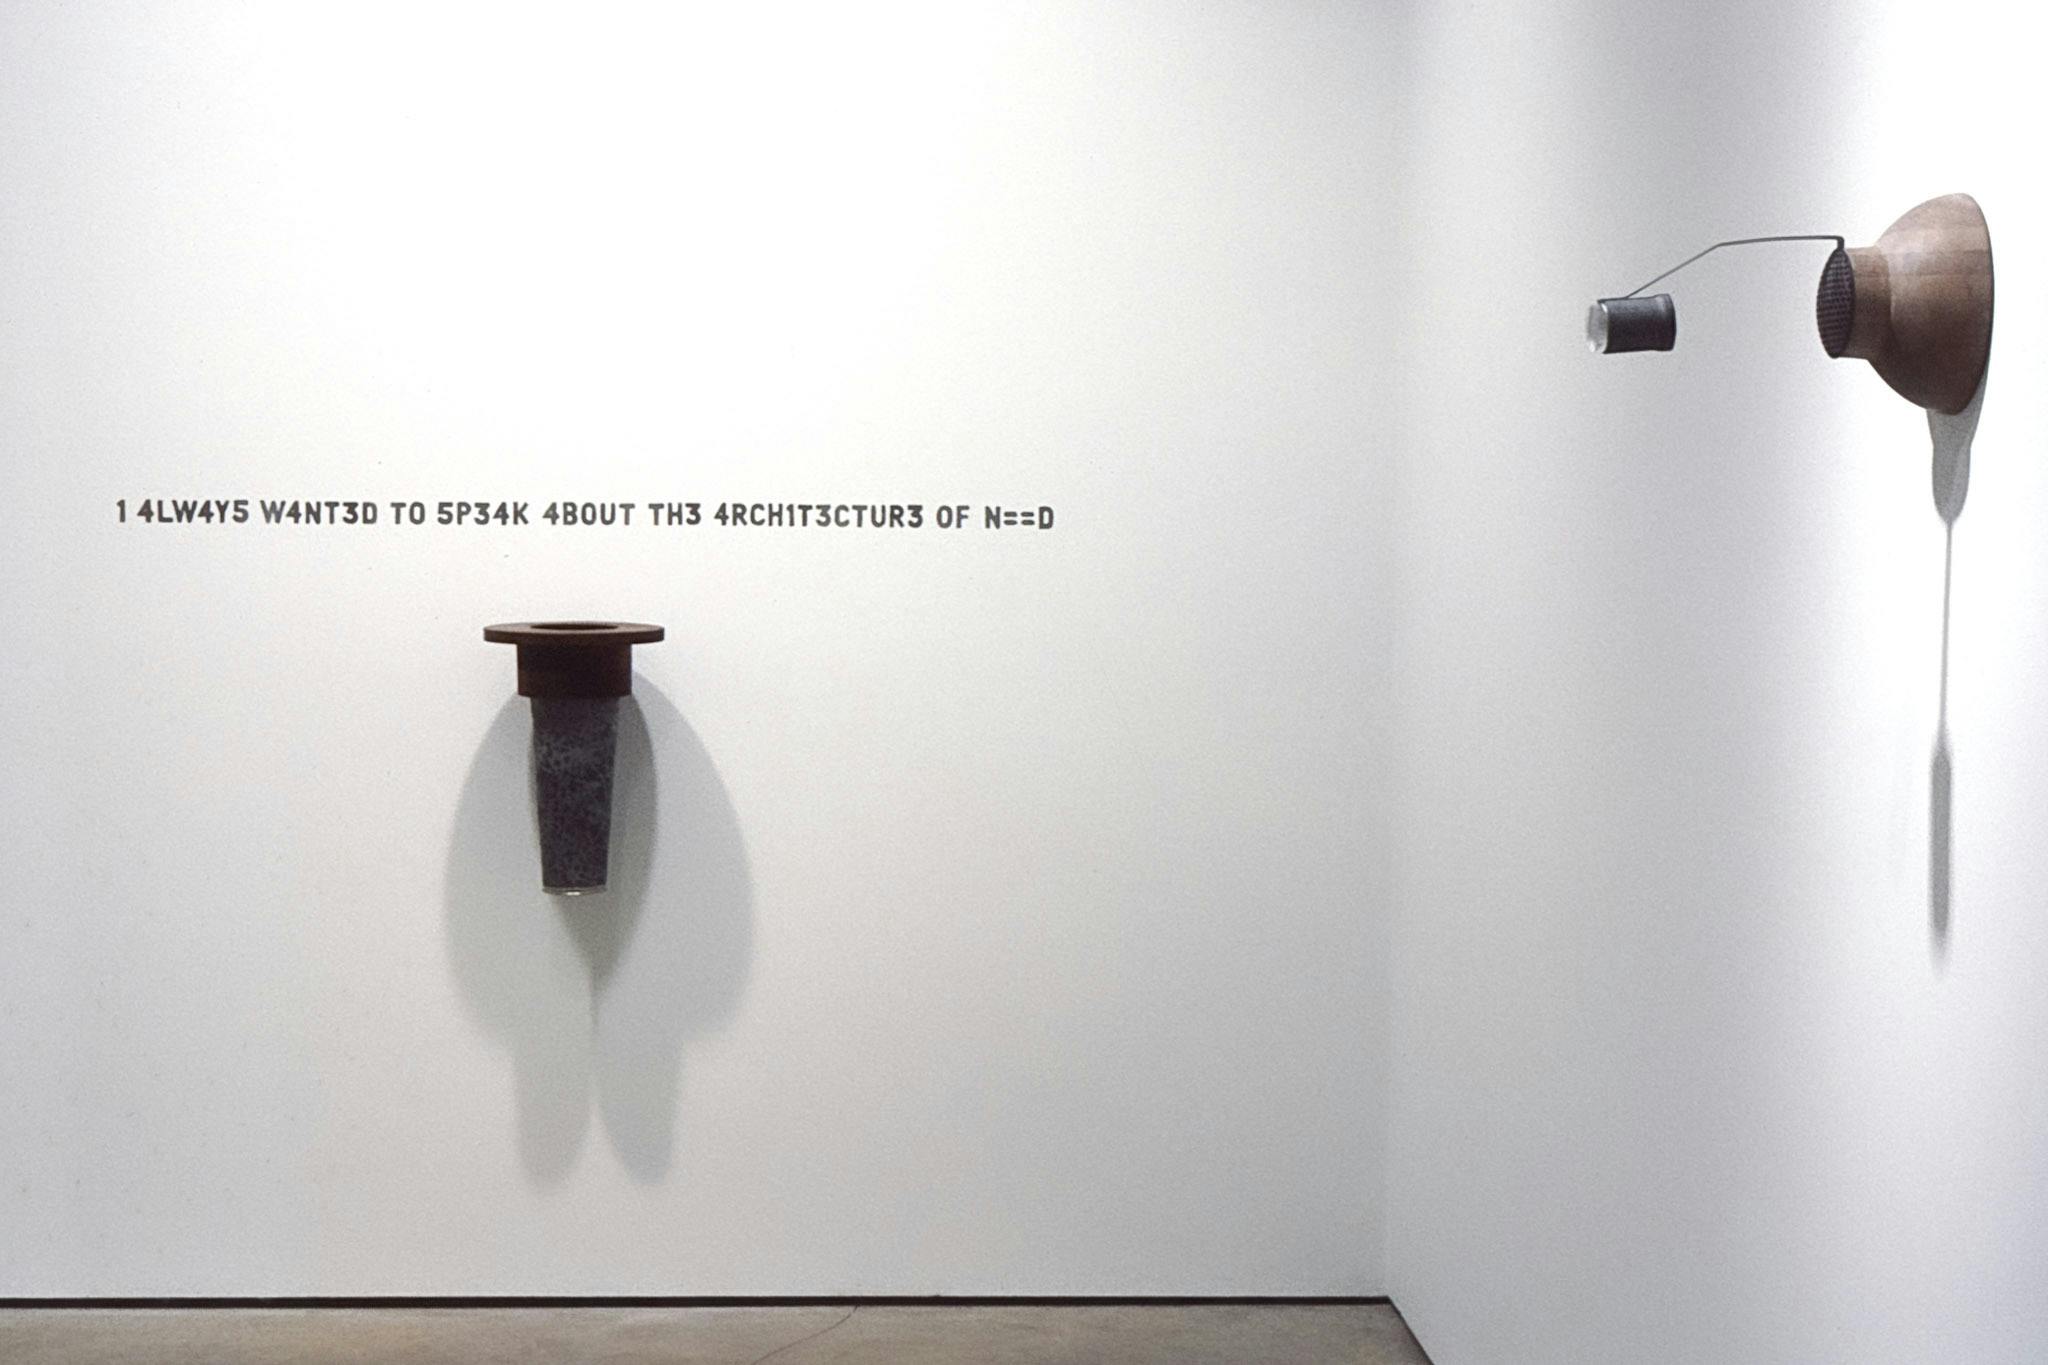 Two artworks are mounted on the gallery walls. Both are wooden sculptures, and one on the left has a sentence, “1 4LW4YS W4NT3D TO SP34K 4BOUT TH3 4RCHIT3CTUR3 OF N==D” typed on the space above it.